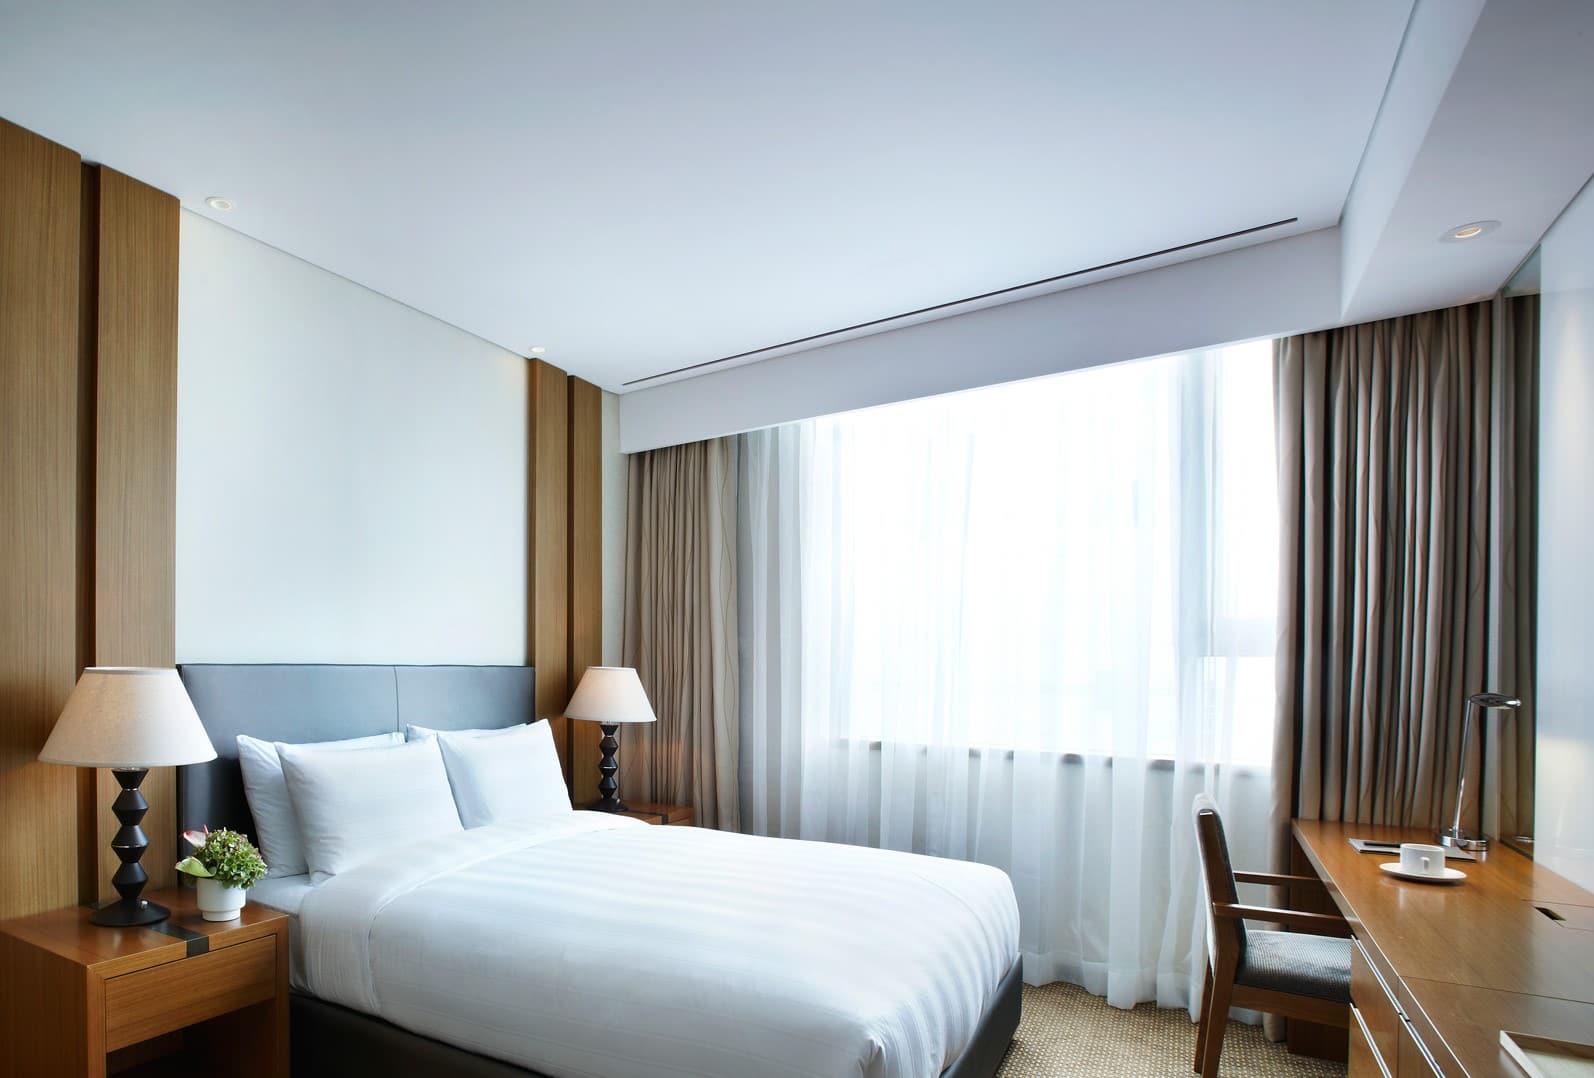 LOTTE City Hotel Guro2 : A neat and cozy guest room with a large bed in the middle